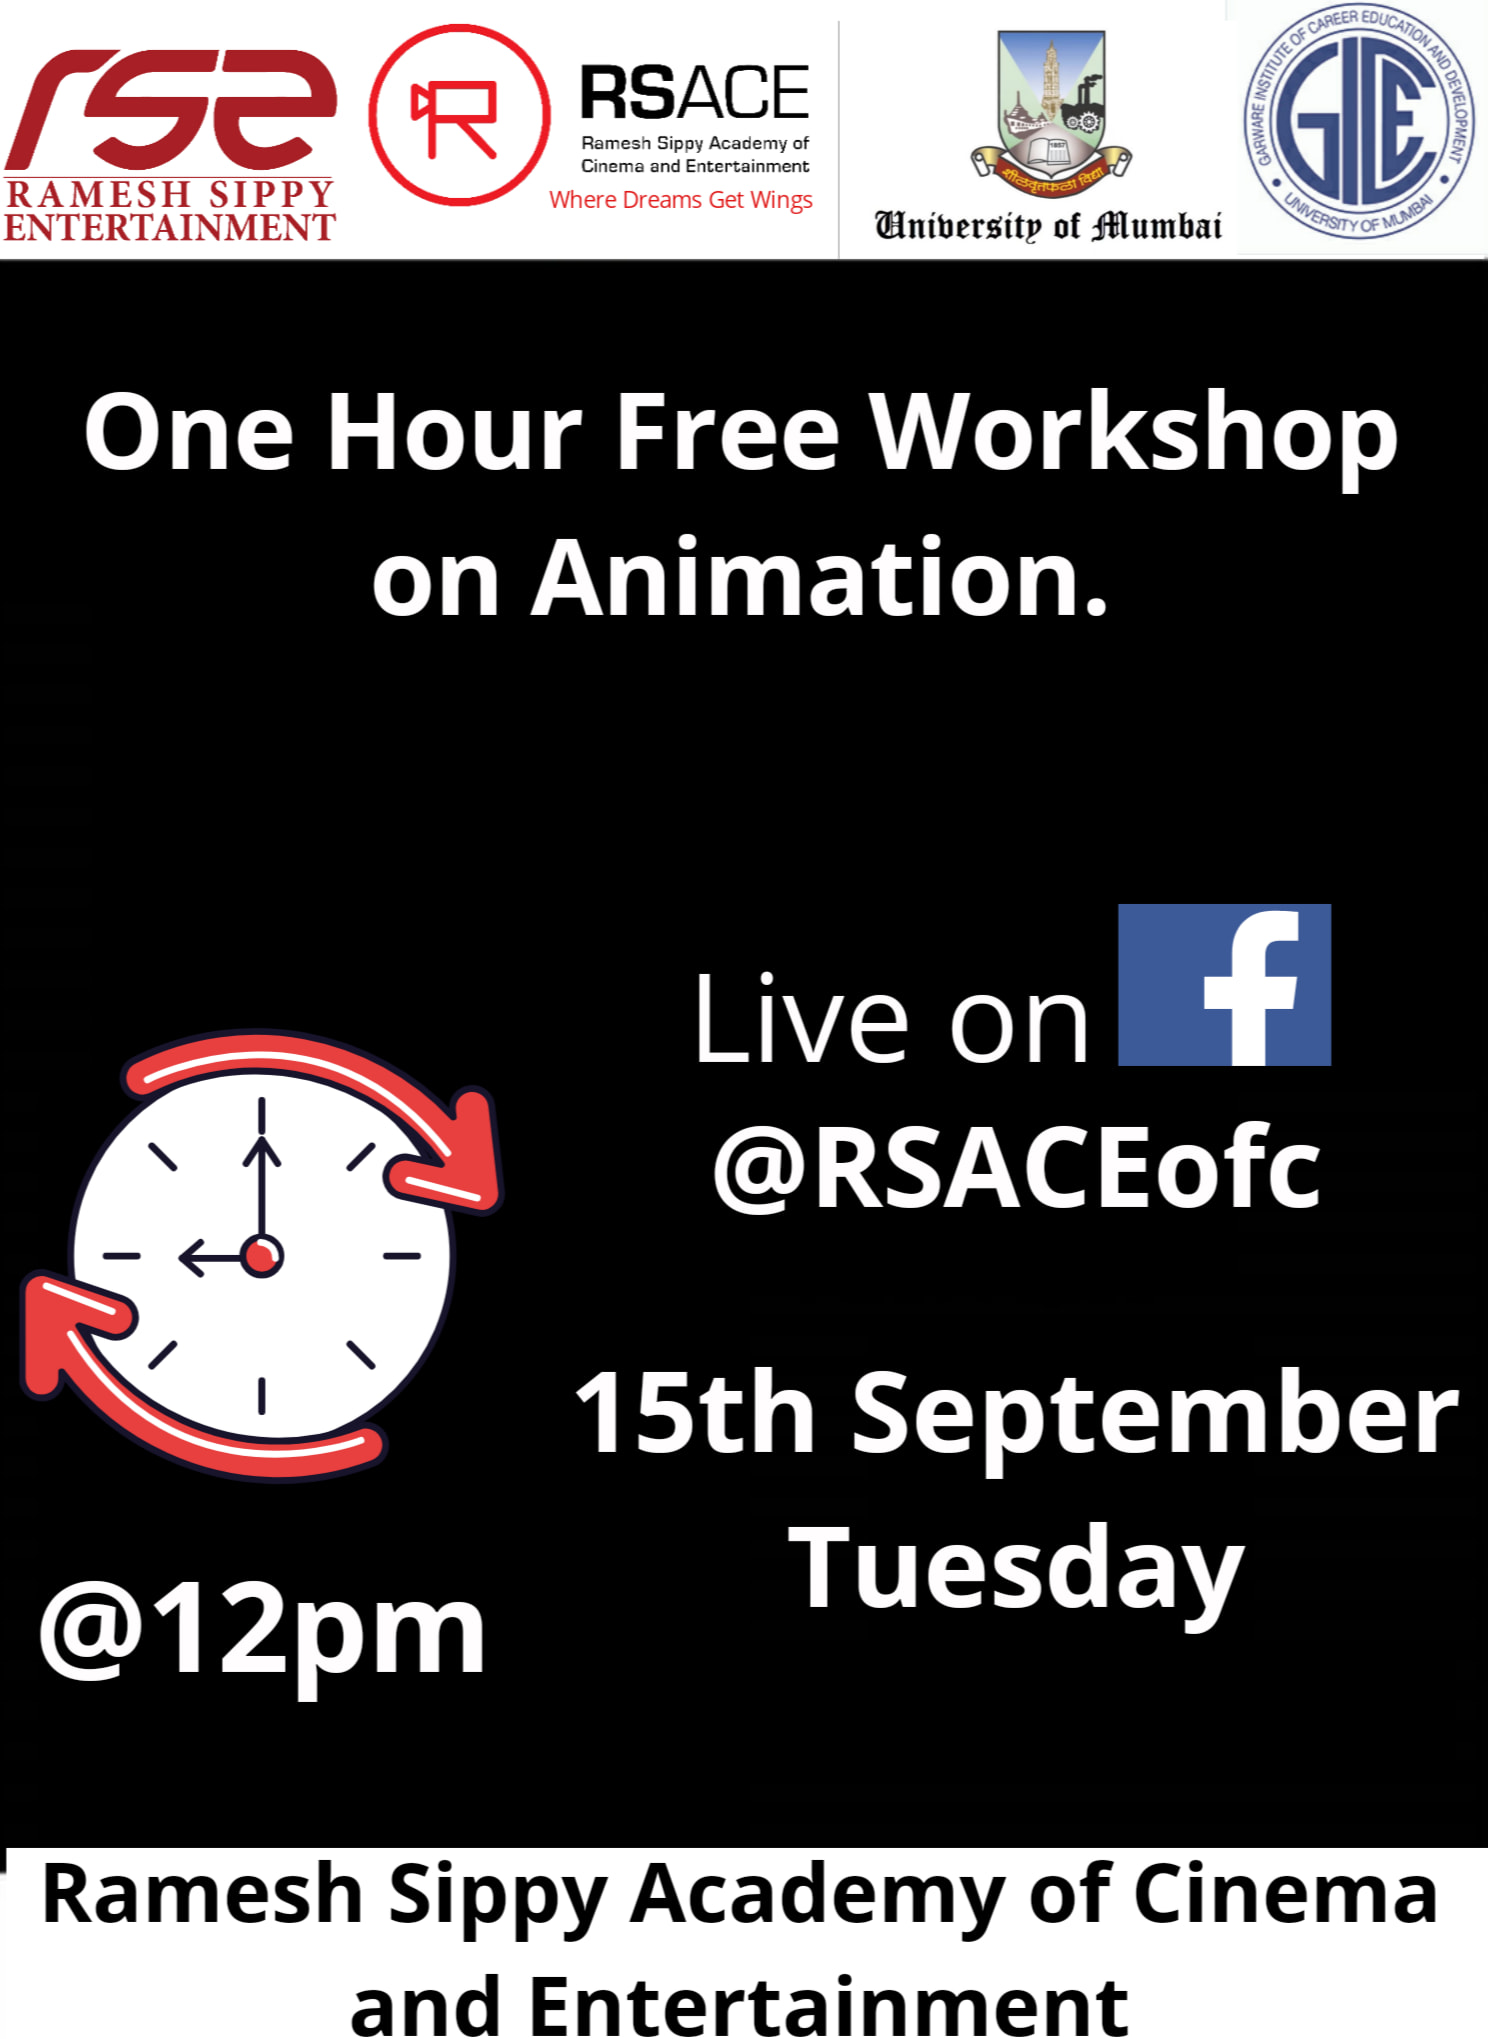 One Hour Free Workshop on Animation